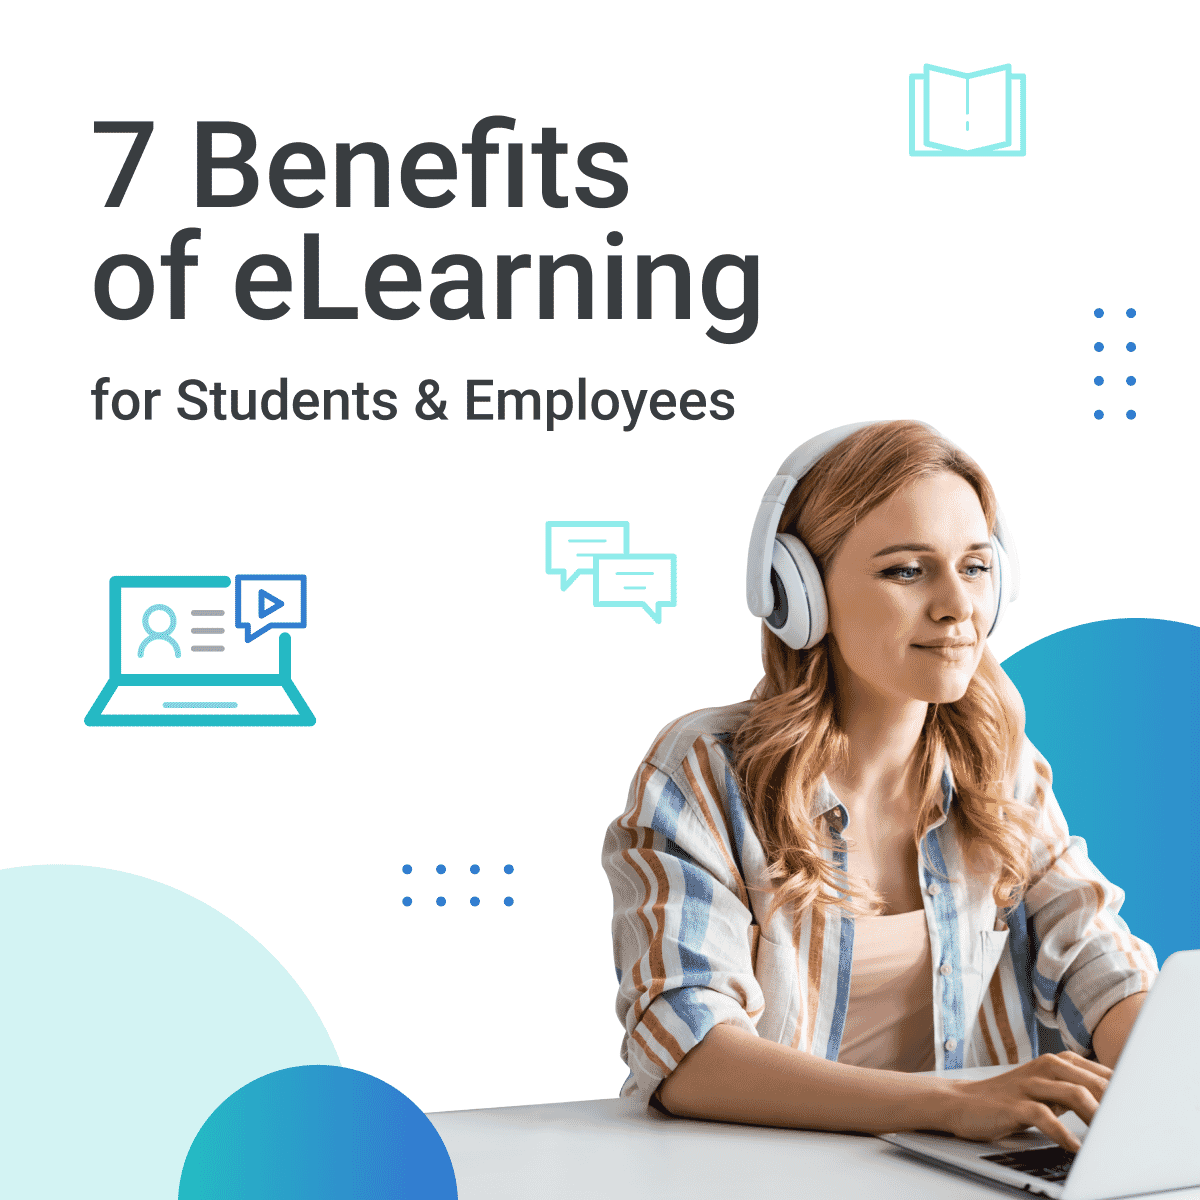 7 Benefits of eLearning for Students & Employees